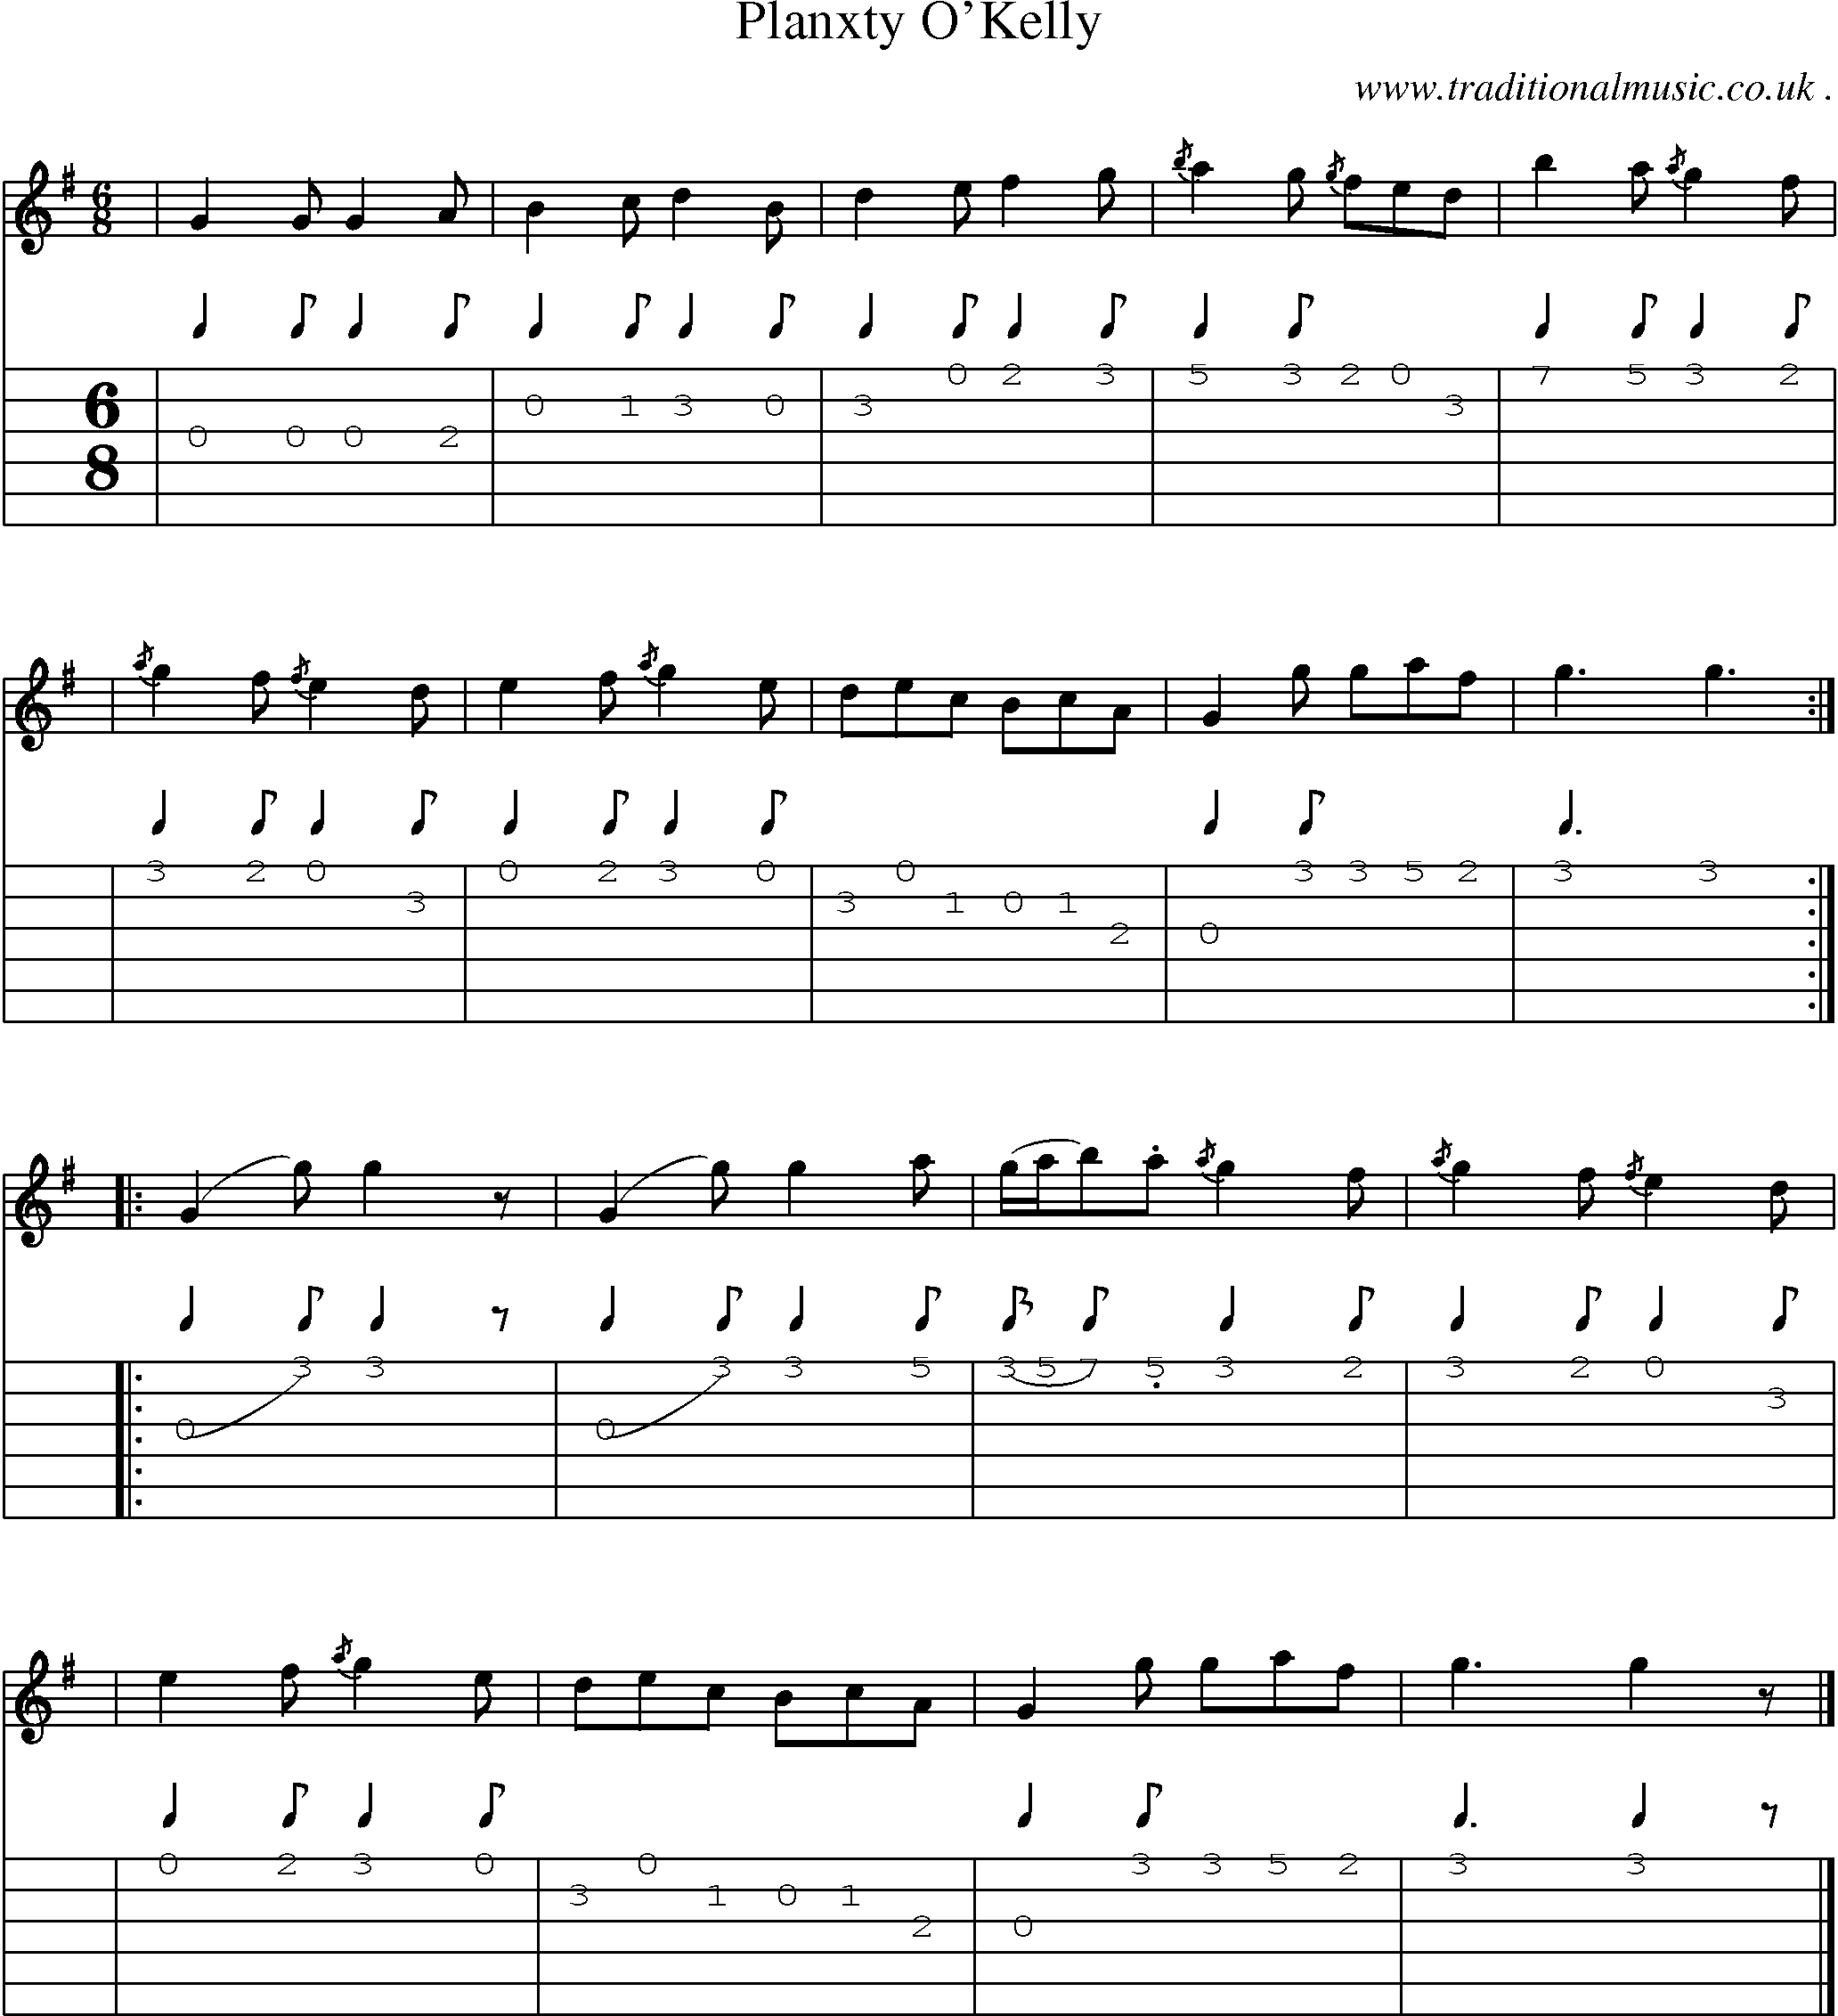 Sheet-music  score, Chords and Guitar Tabs for Planxty Okelly